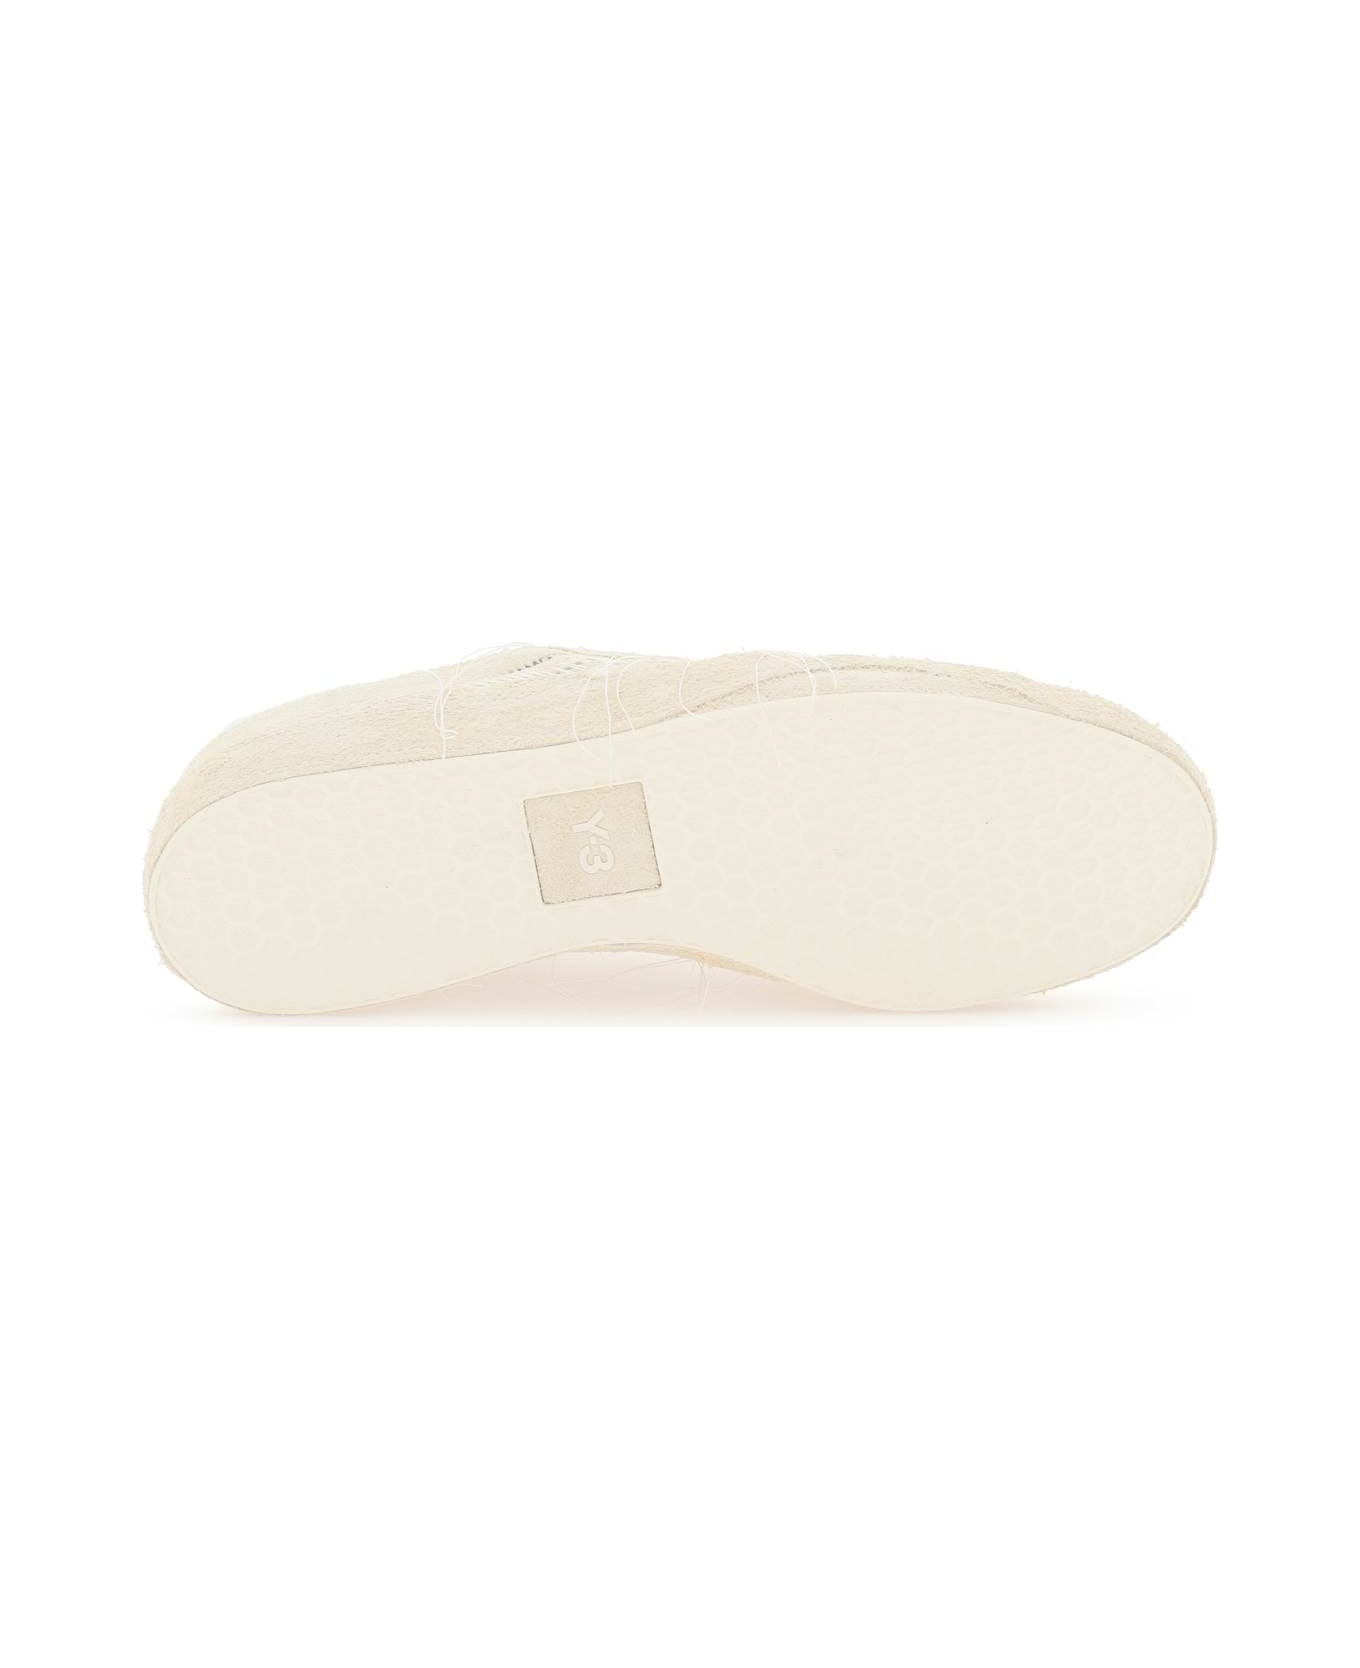 Y-3 Gazelle Ivory Suede Sneakers - White スニーカー